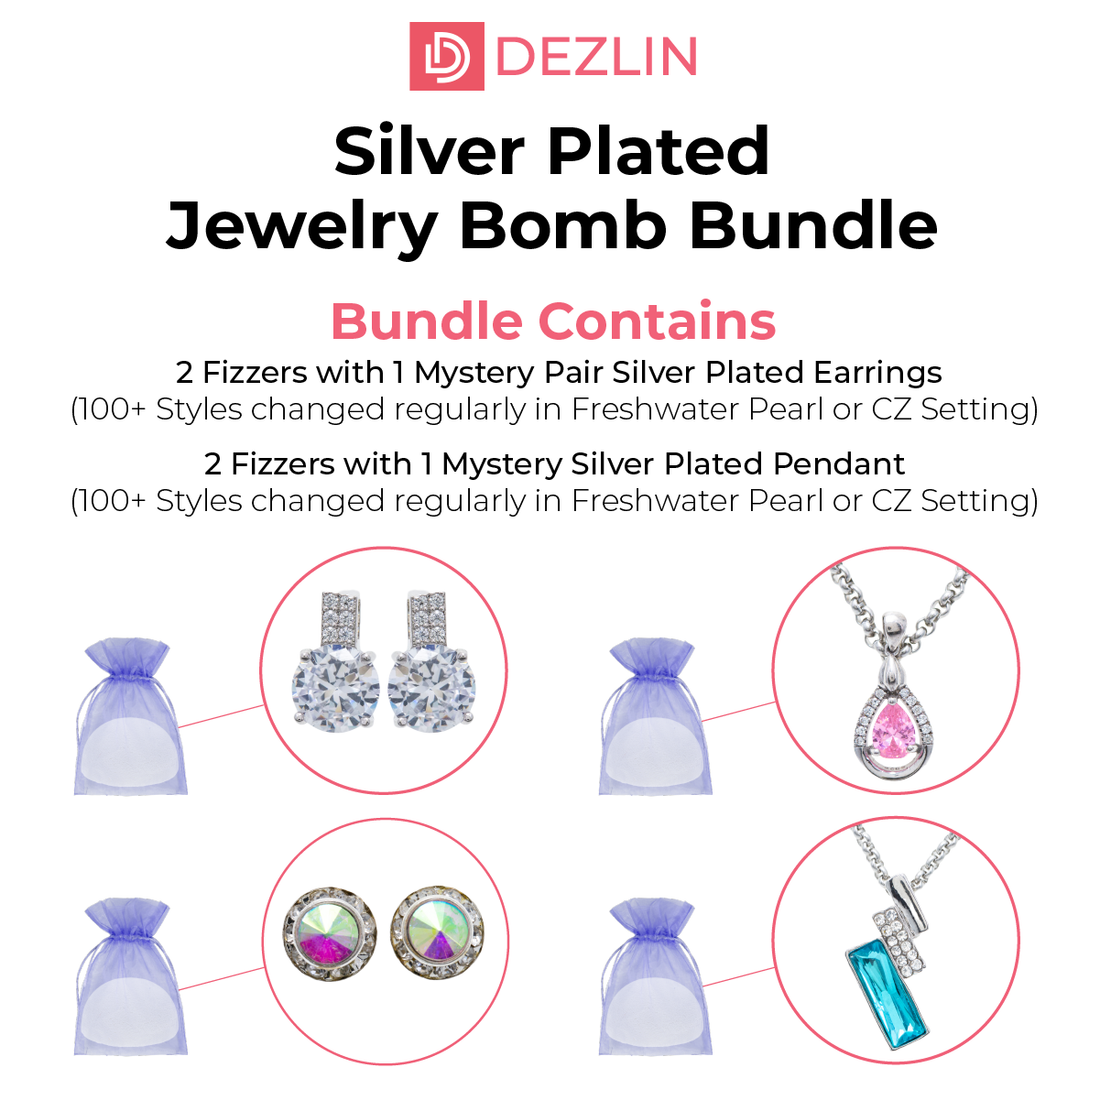 Jewelry Bomb - Silver Plated Saver Bundle (4 Bombs)